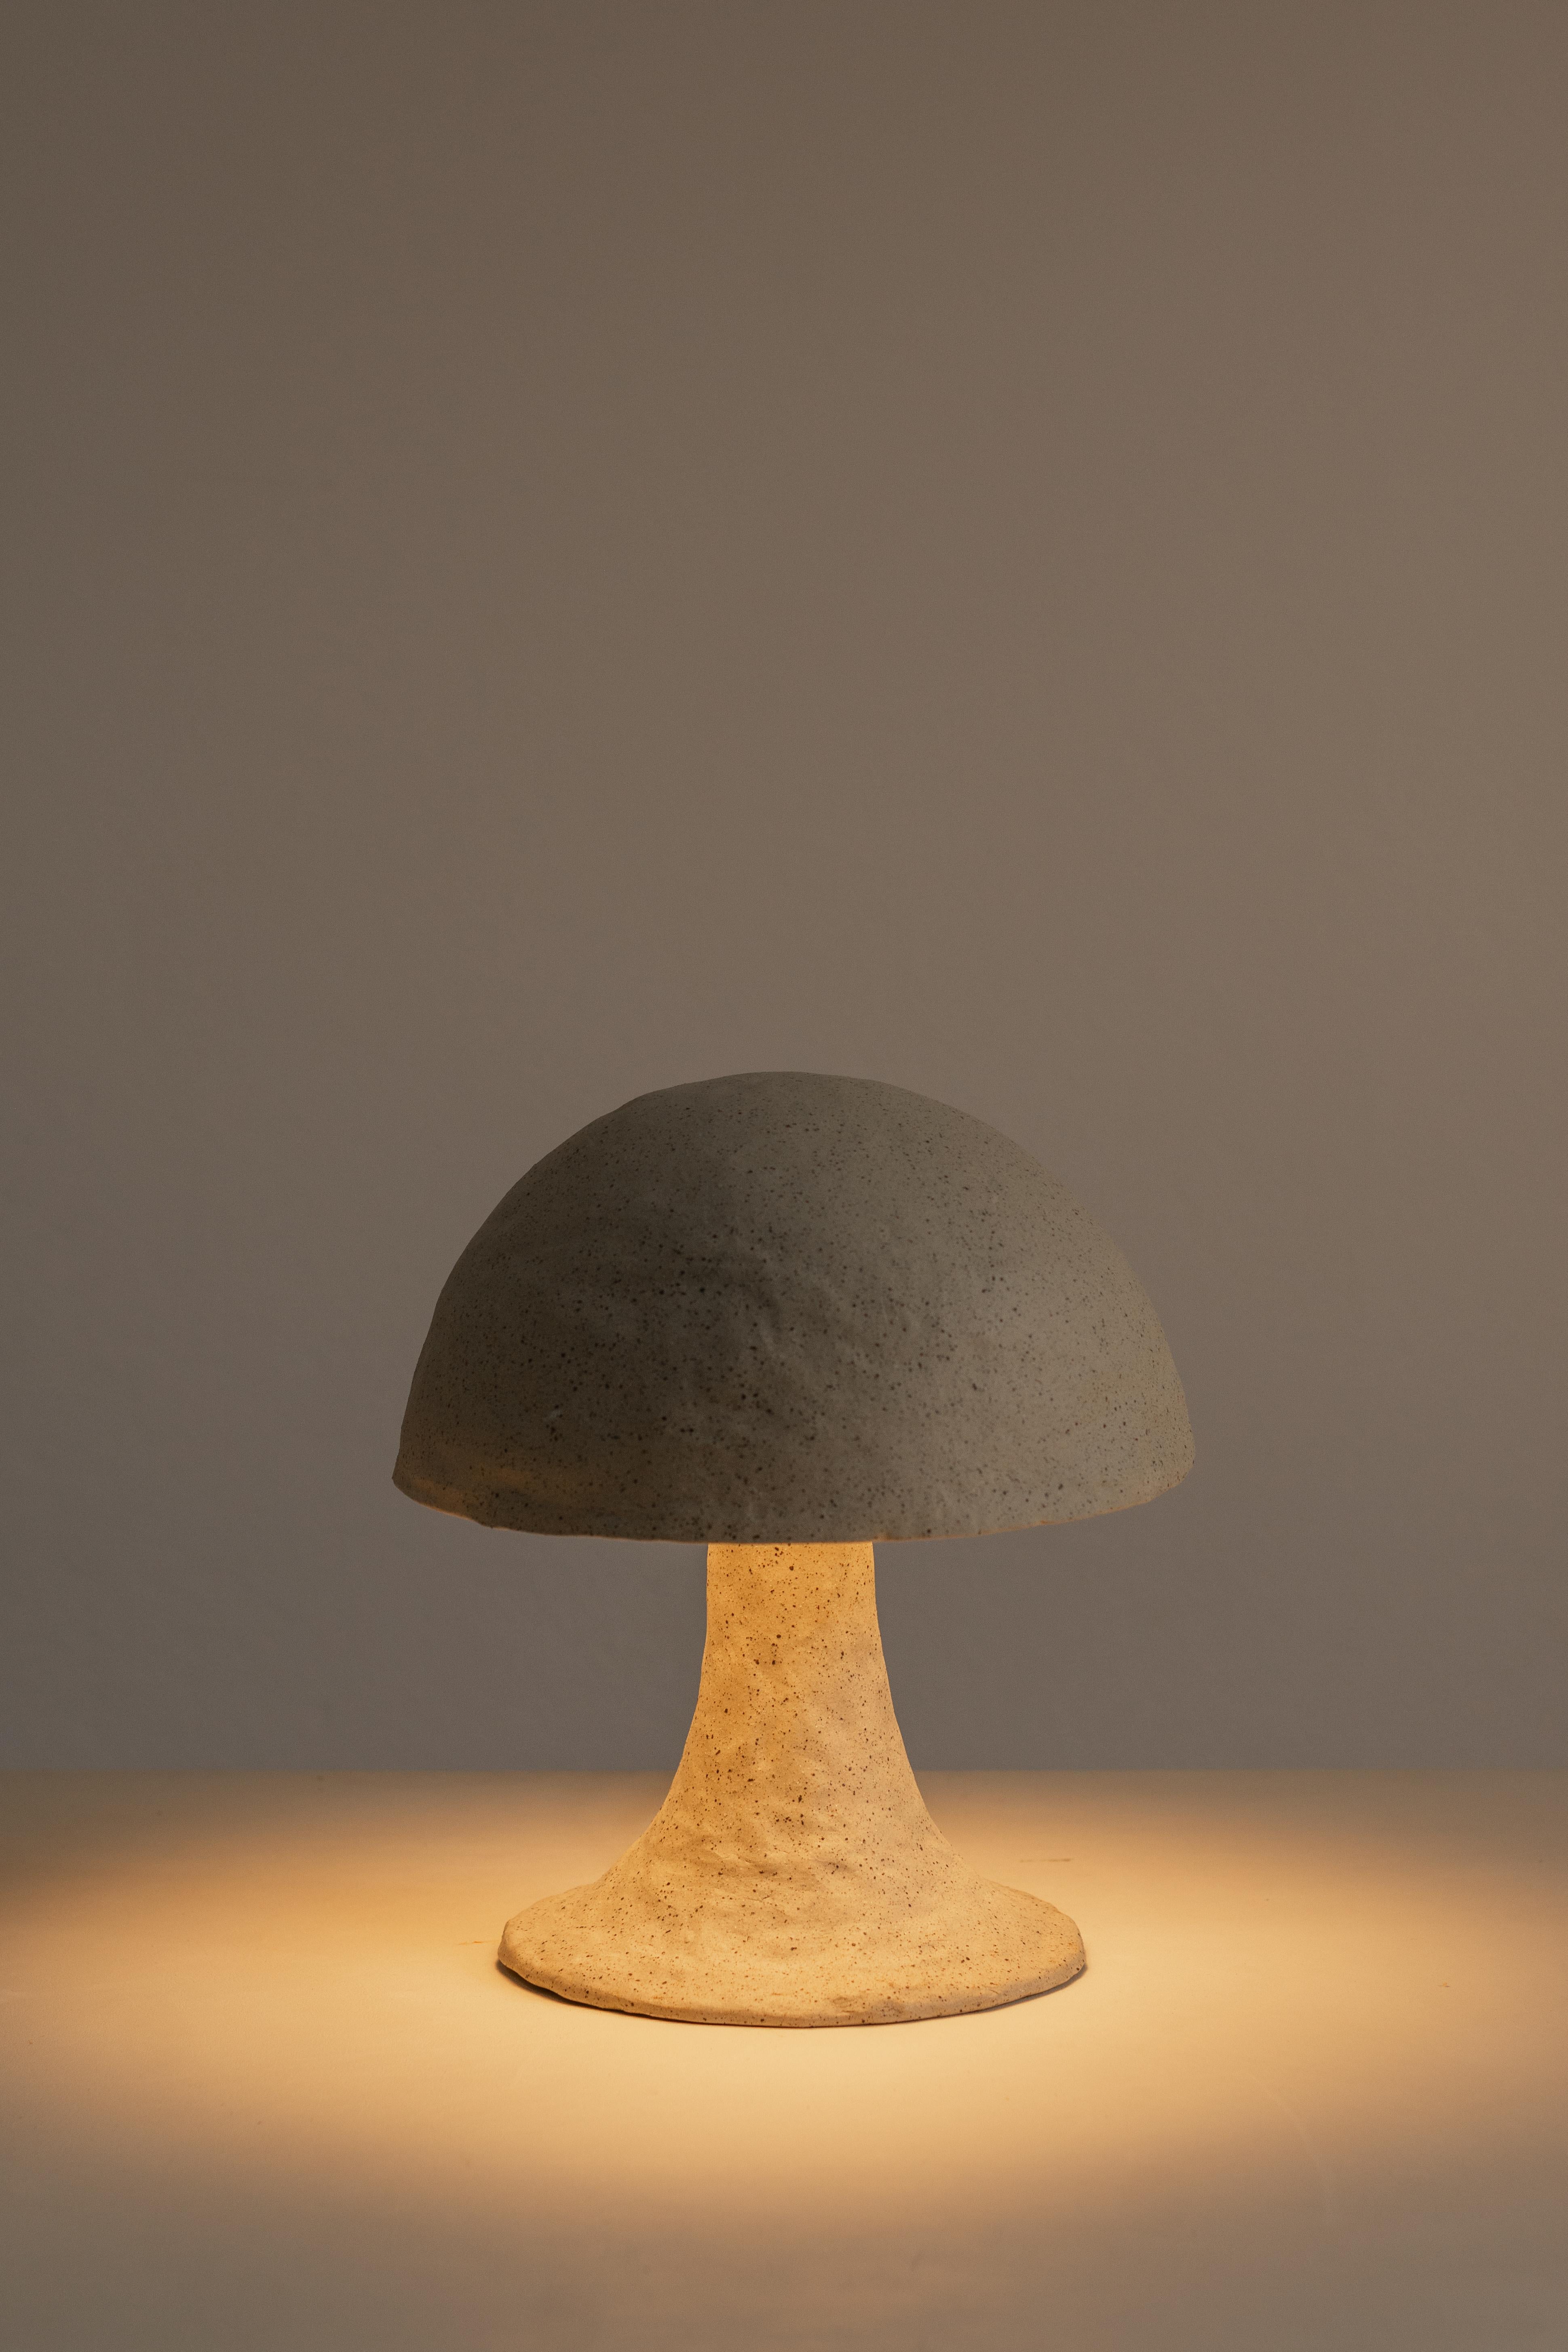 The Amanita Muscaria ceramic lamp stands as a testament to the artistry and ingenuity of the human spirit. Its unique design, inspired by the enchanting mushroom of the forest, creates an otherworldly ambiance that invites us to reconnect with the